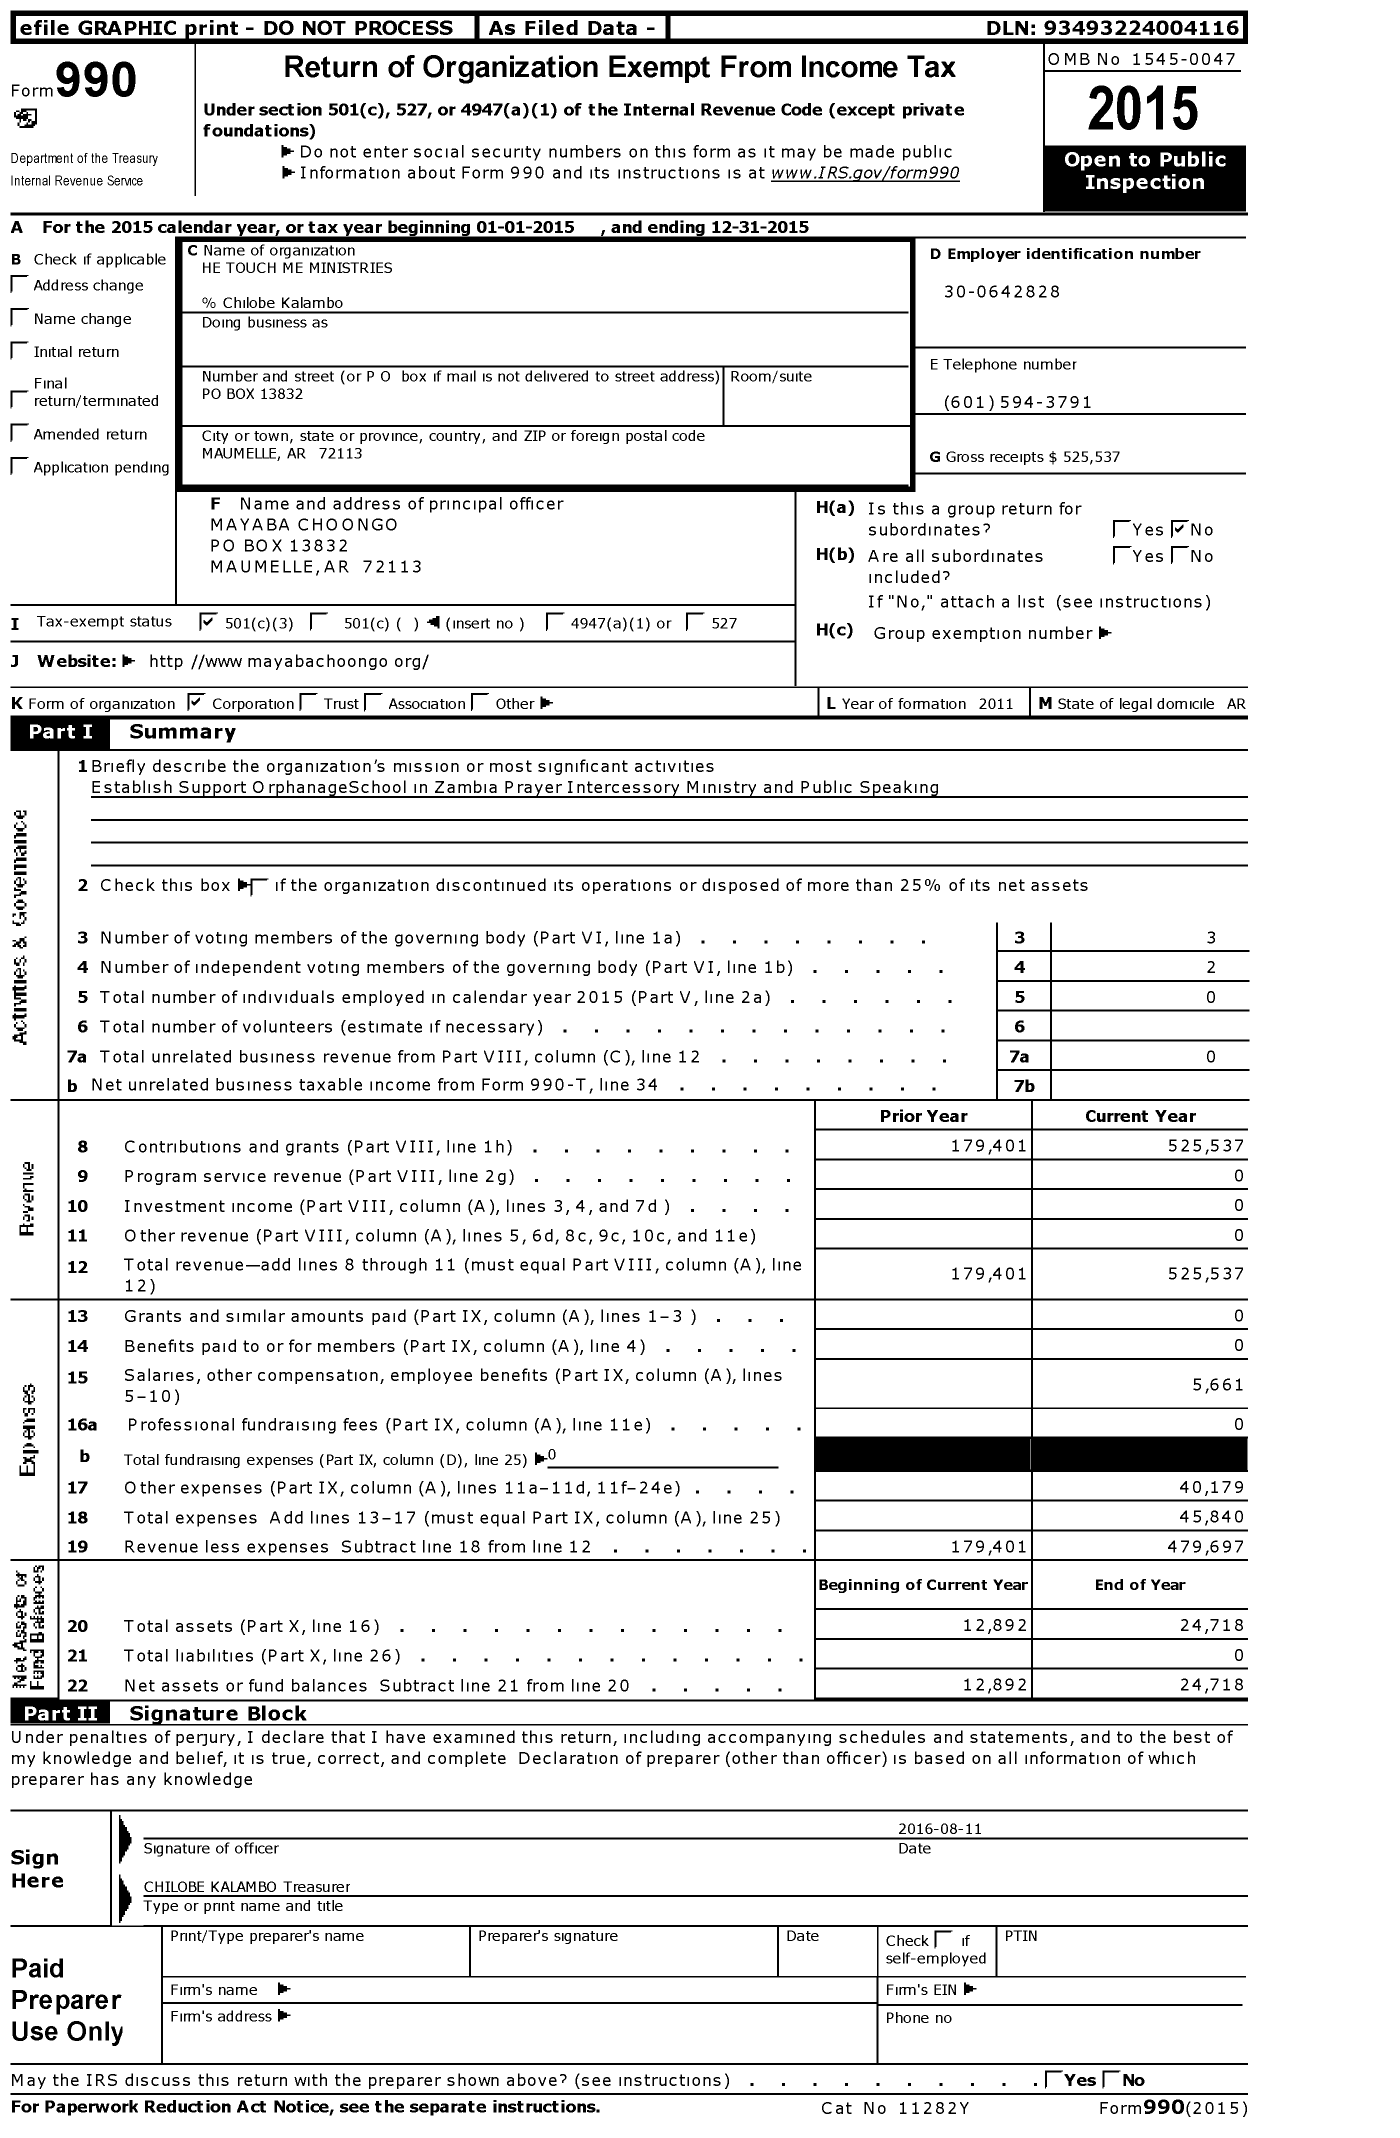 Image of first page of 2015 Form 990 for He Touch Me Ministries